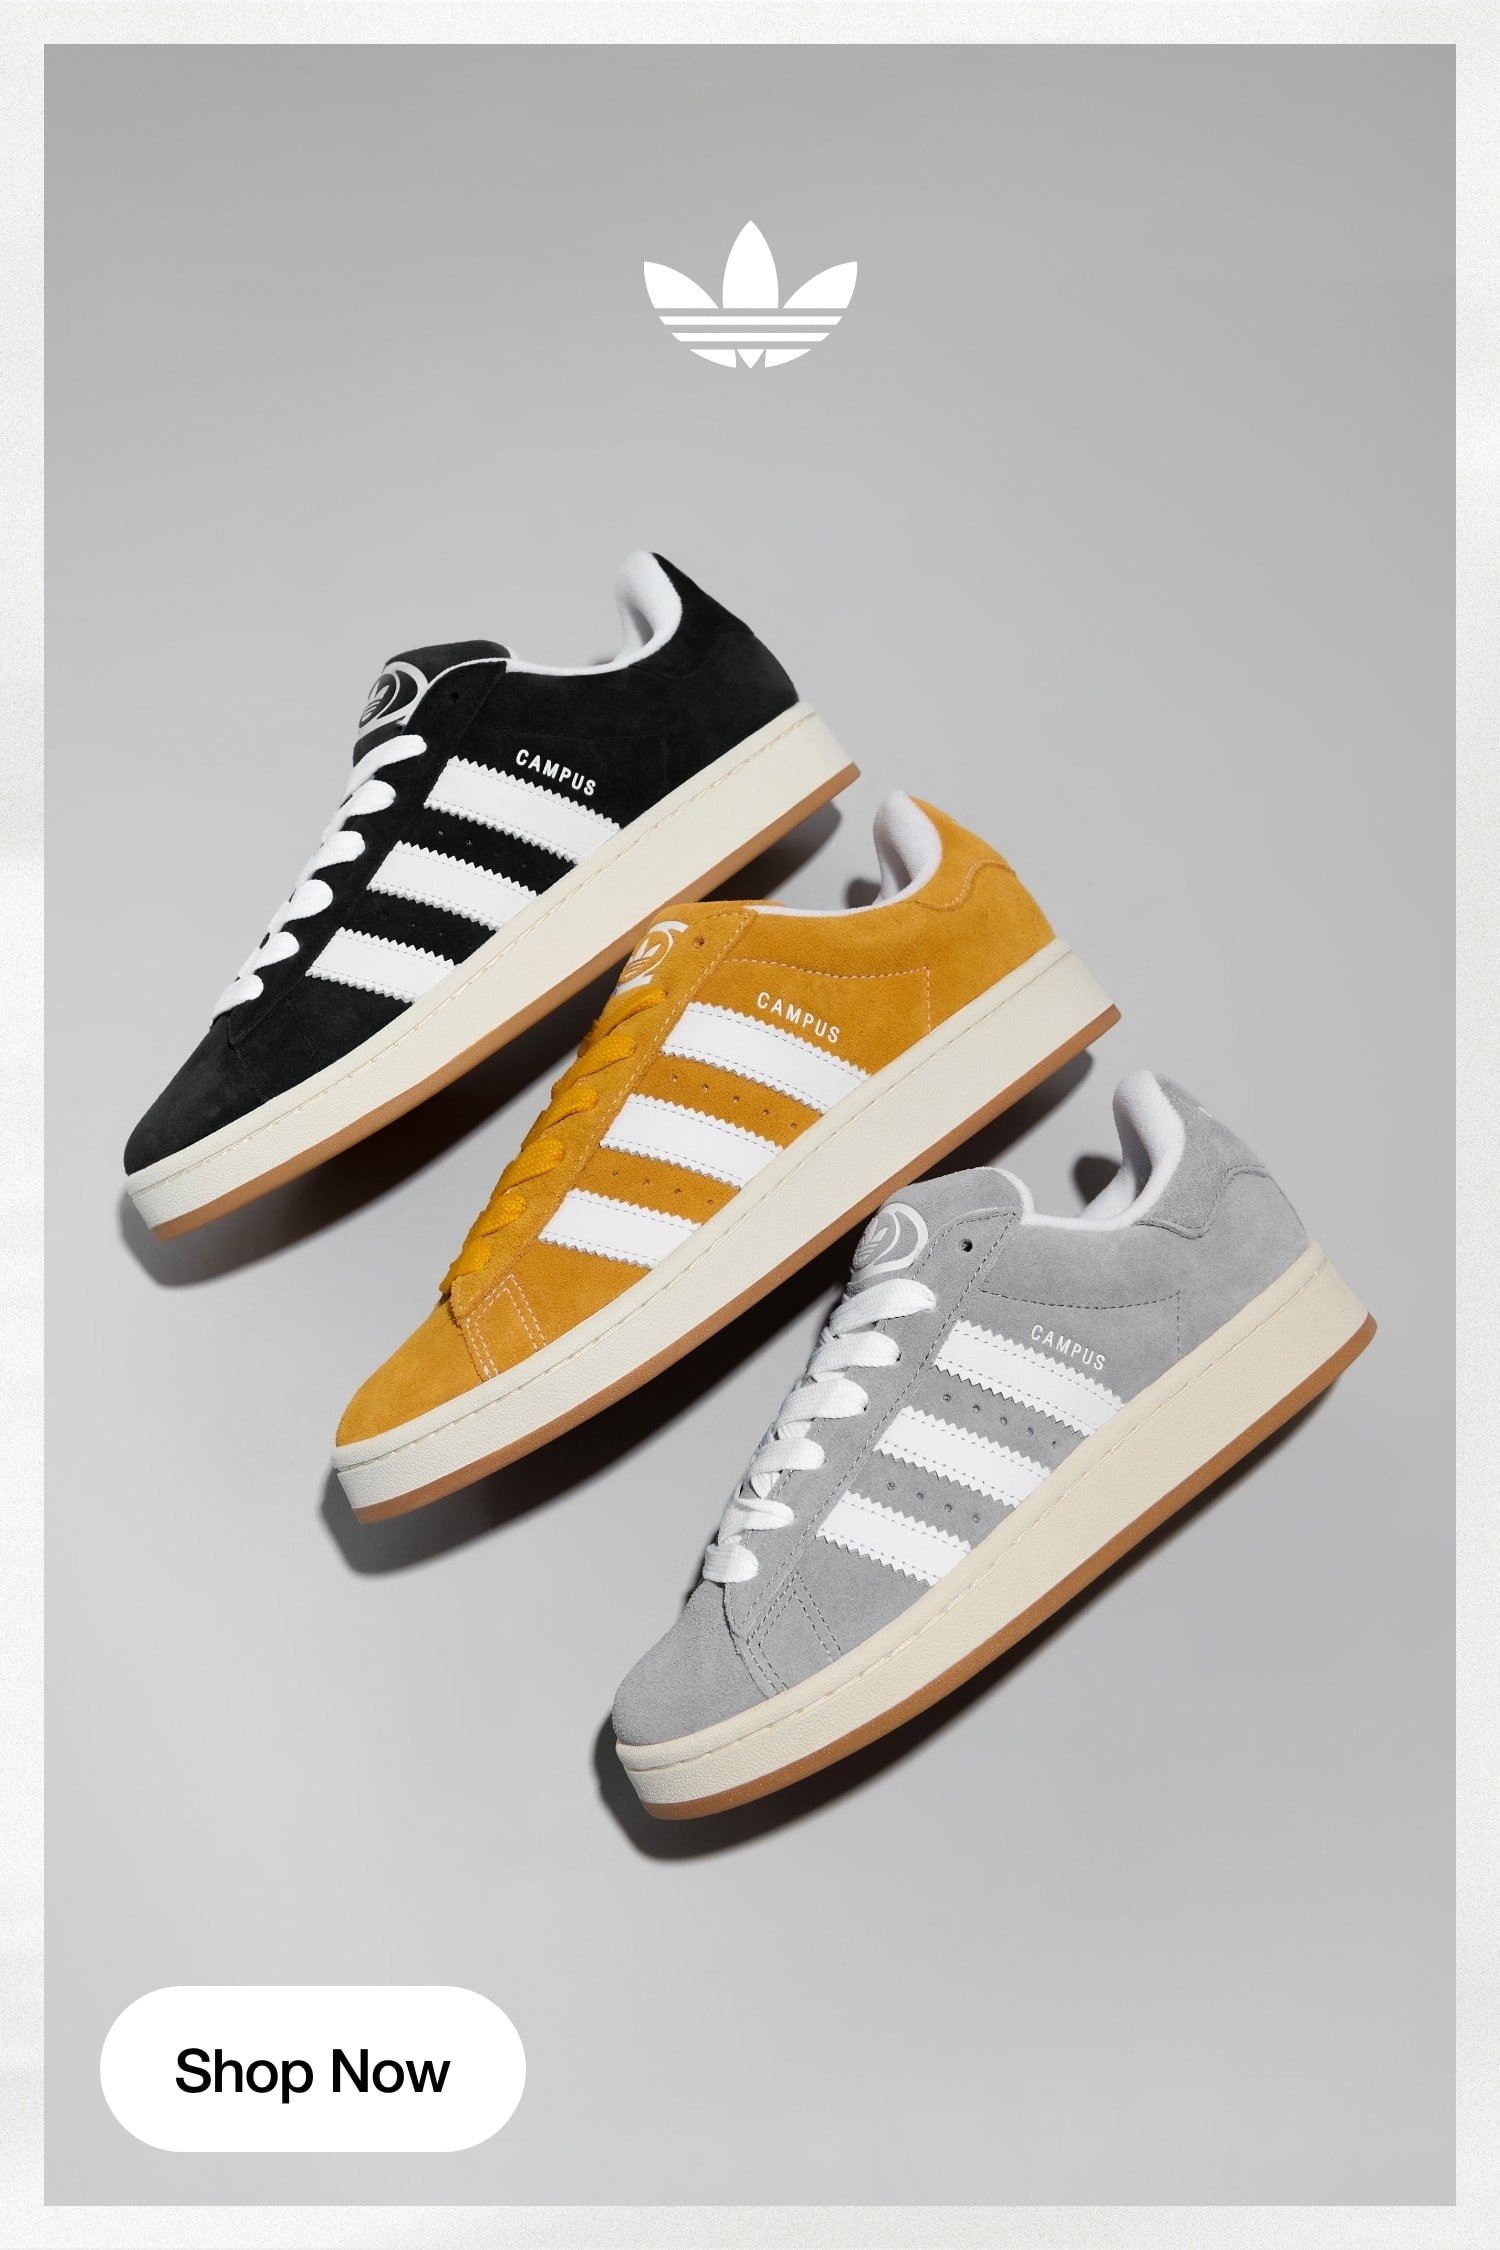 Global Supplier of Latest Footwear and Clothing | Ssil? | adidas 